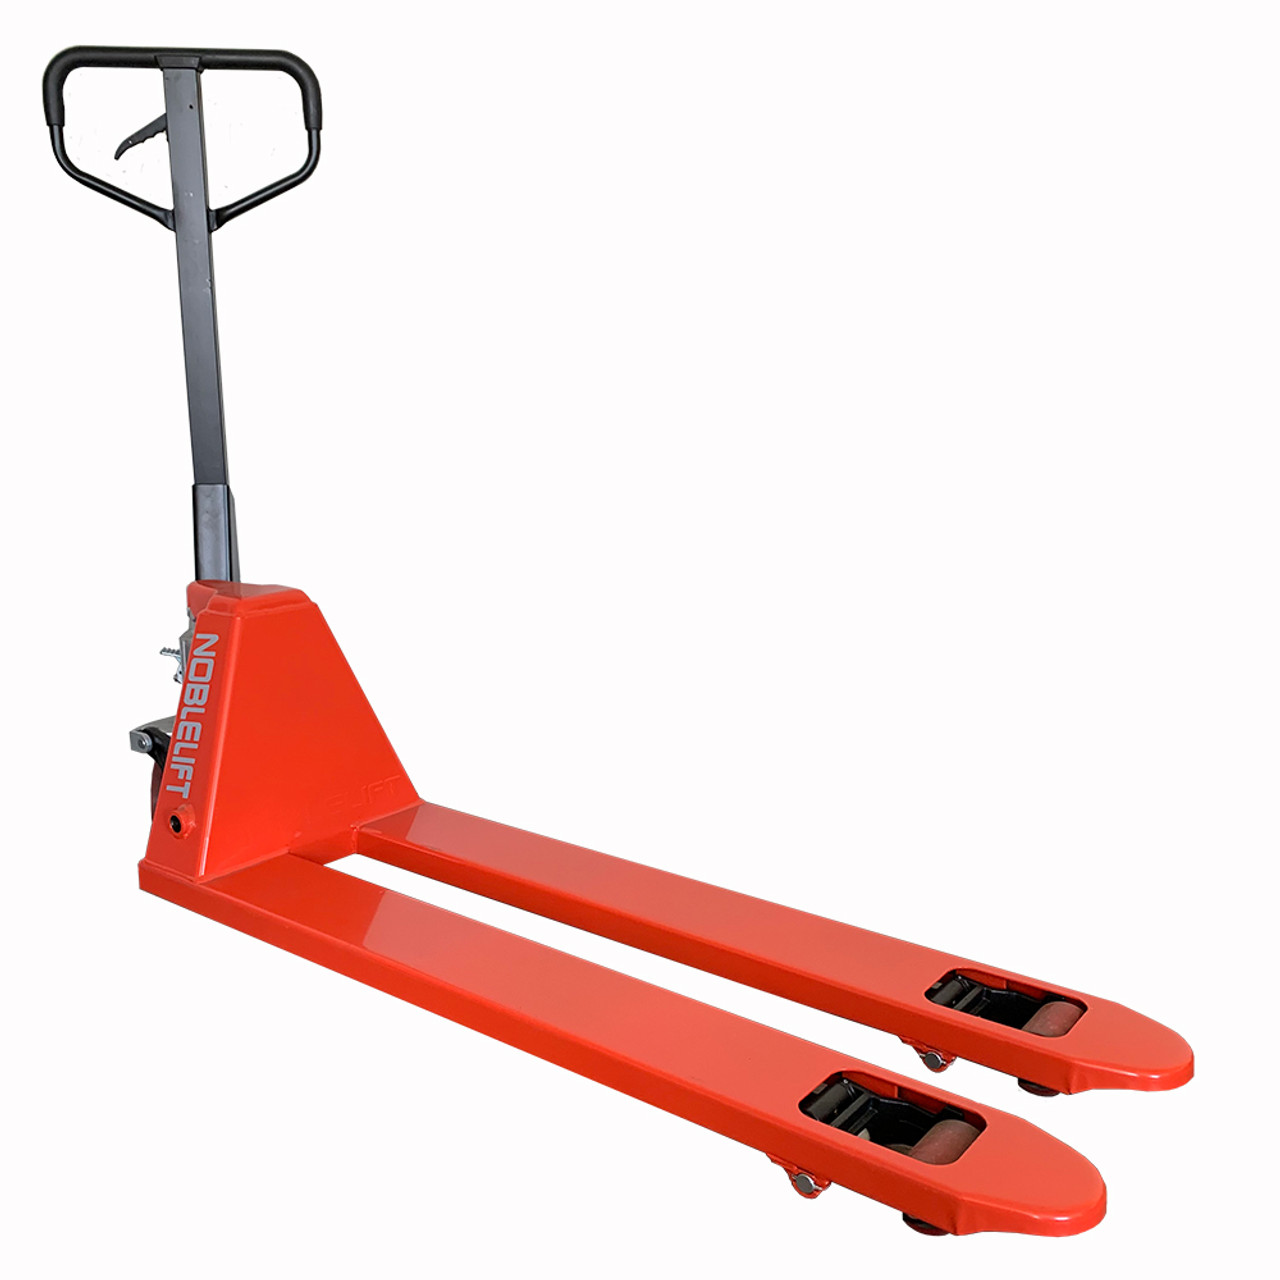 Front view of the AC55 pallet truck